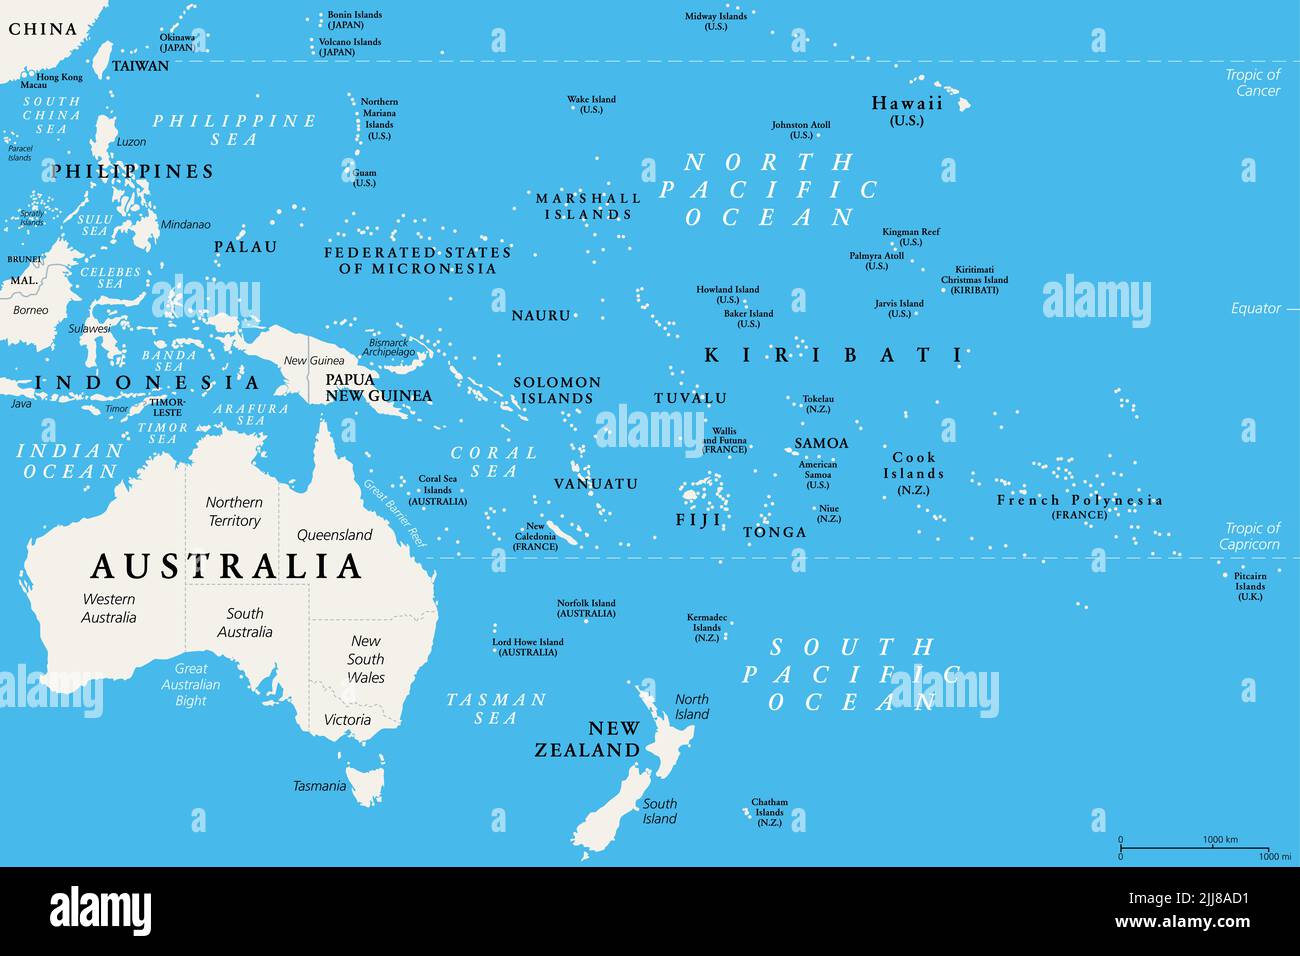 Oceania, political map. Australia and the Pacific, including New Zealand. Geographic region, southeast of the Asia-Pacific region. Stock Photo